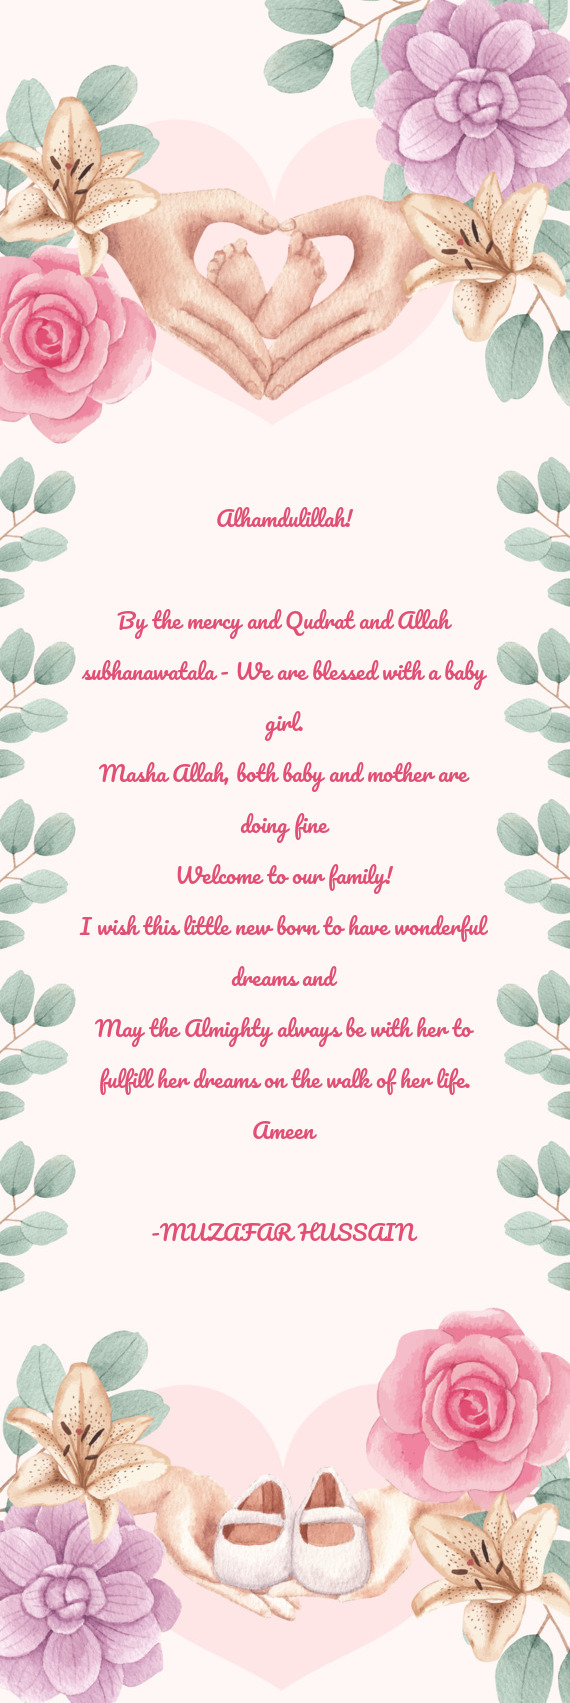 Alhamdulillah! By the mercy and Qudrat and Allah subhanawatala - We are blessed with a baby girl